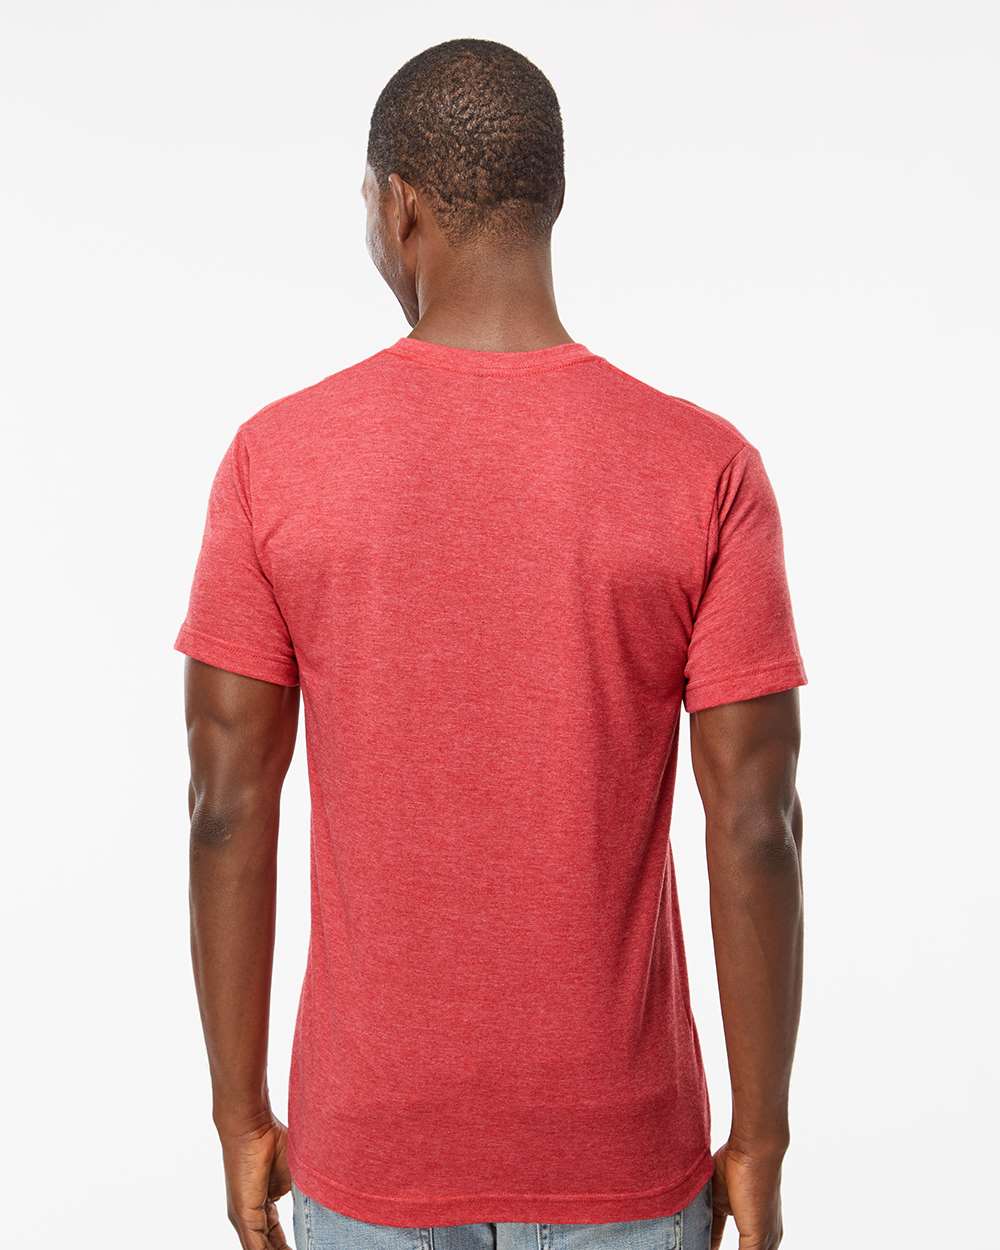 M&O Deluxe Blend V-Neck T-Shirt 3543 #colormdl_Heather Red